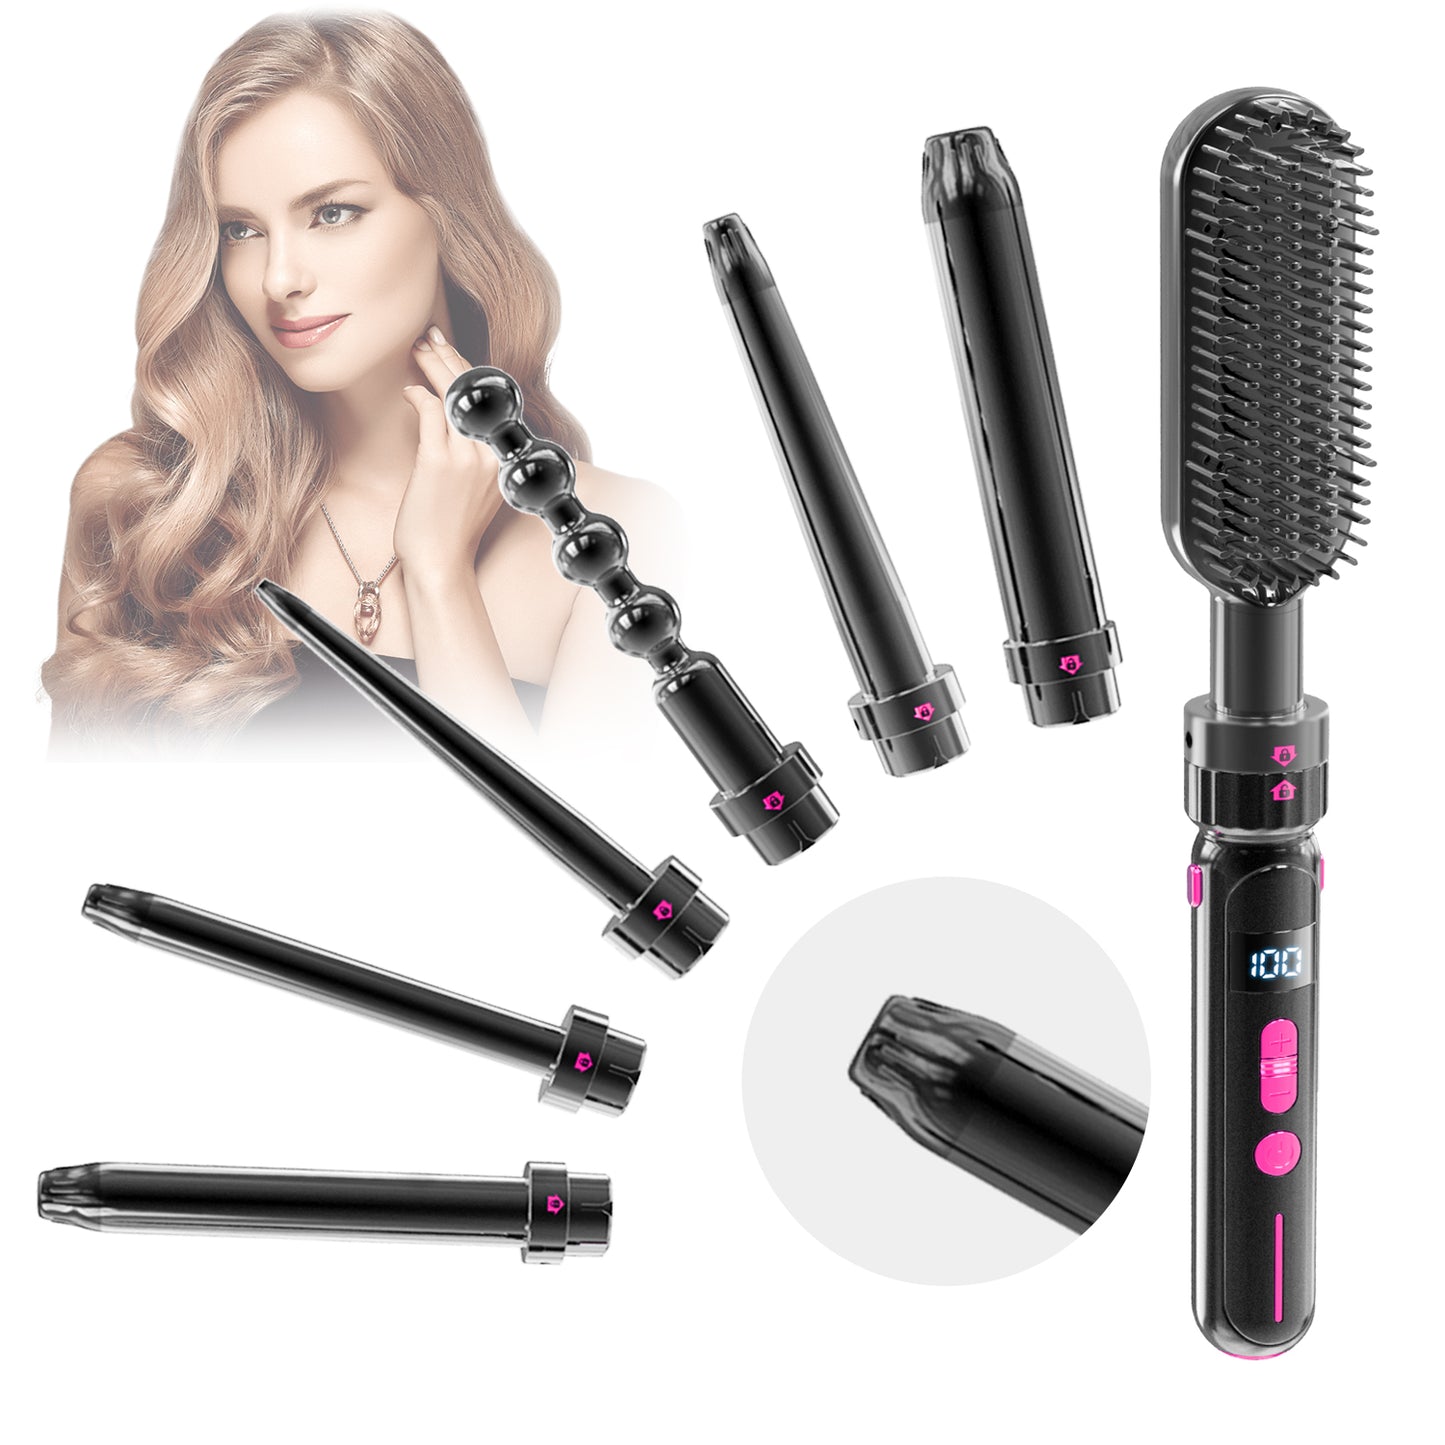 7-IN-1 Scald-Proof Easy-to-Use Curly Hair Sticks - Safe & Stylish